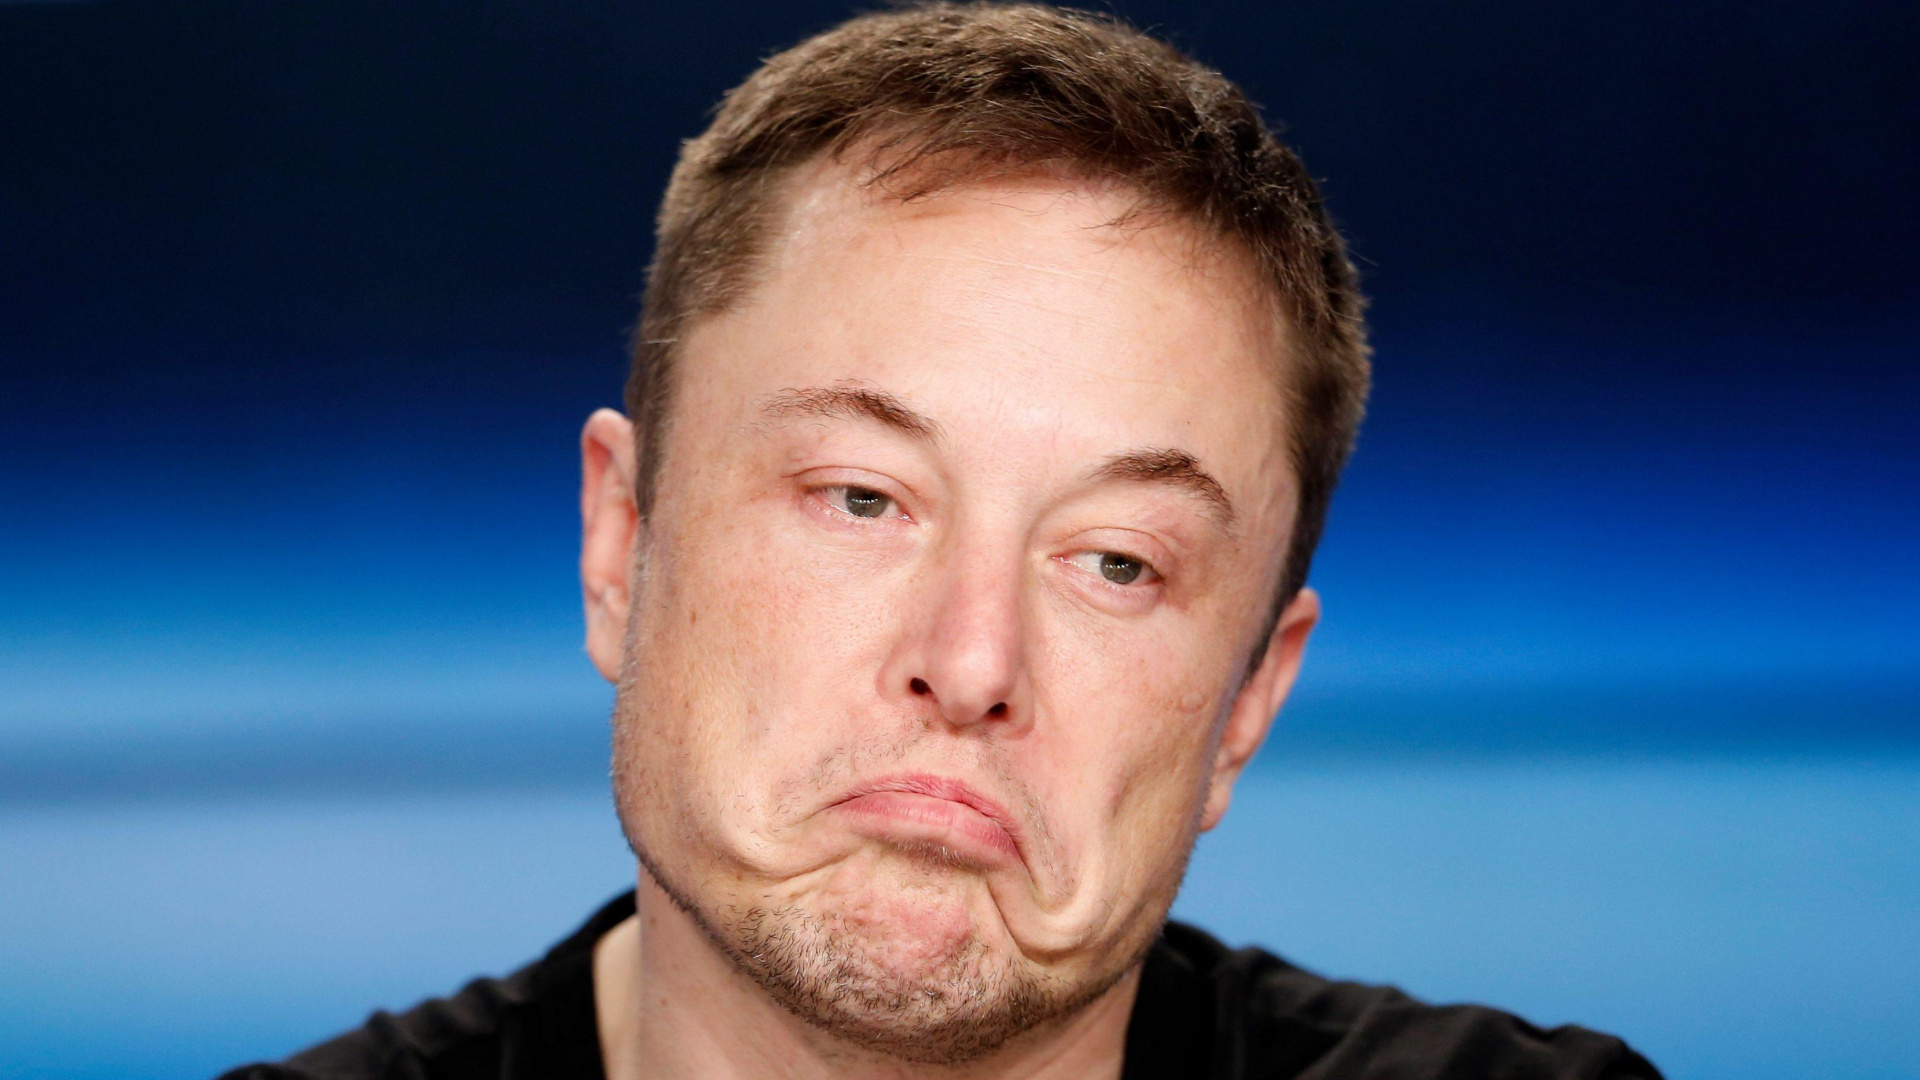 Elon Musk, Tham Luang Cave Rescue, Face, Forehead, Chin. Wallpaper in 1920x1080 Resolution